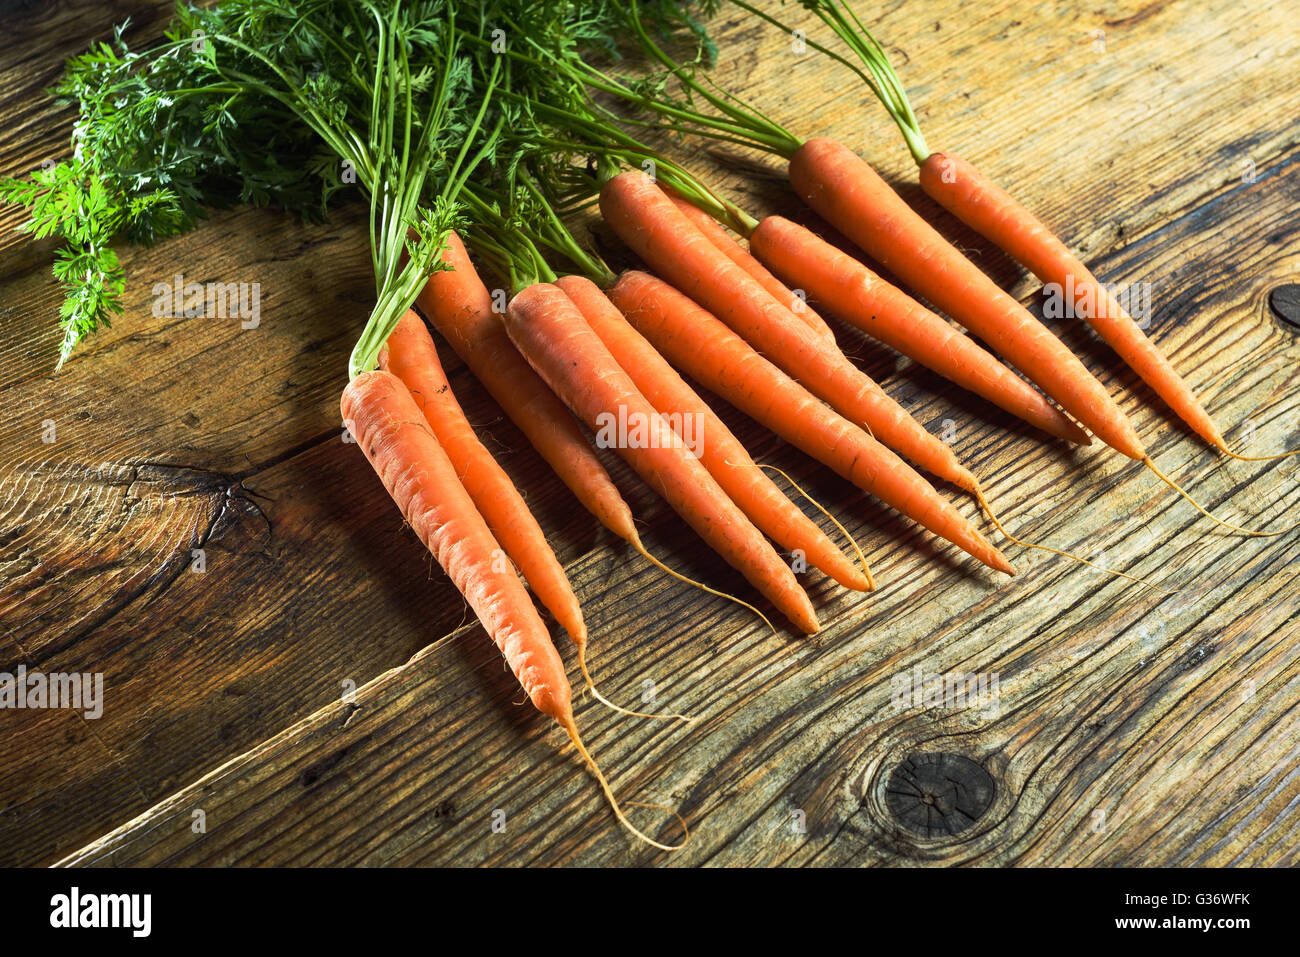 Juicy bunch of carrots on a rustic wooden table. Stock Photo